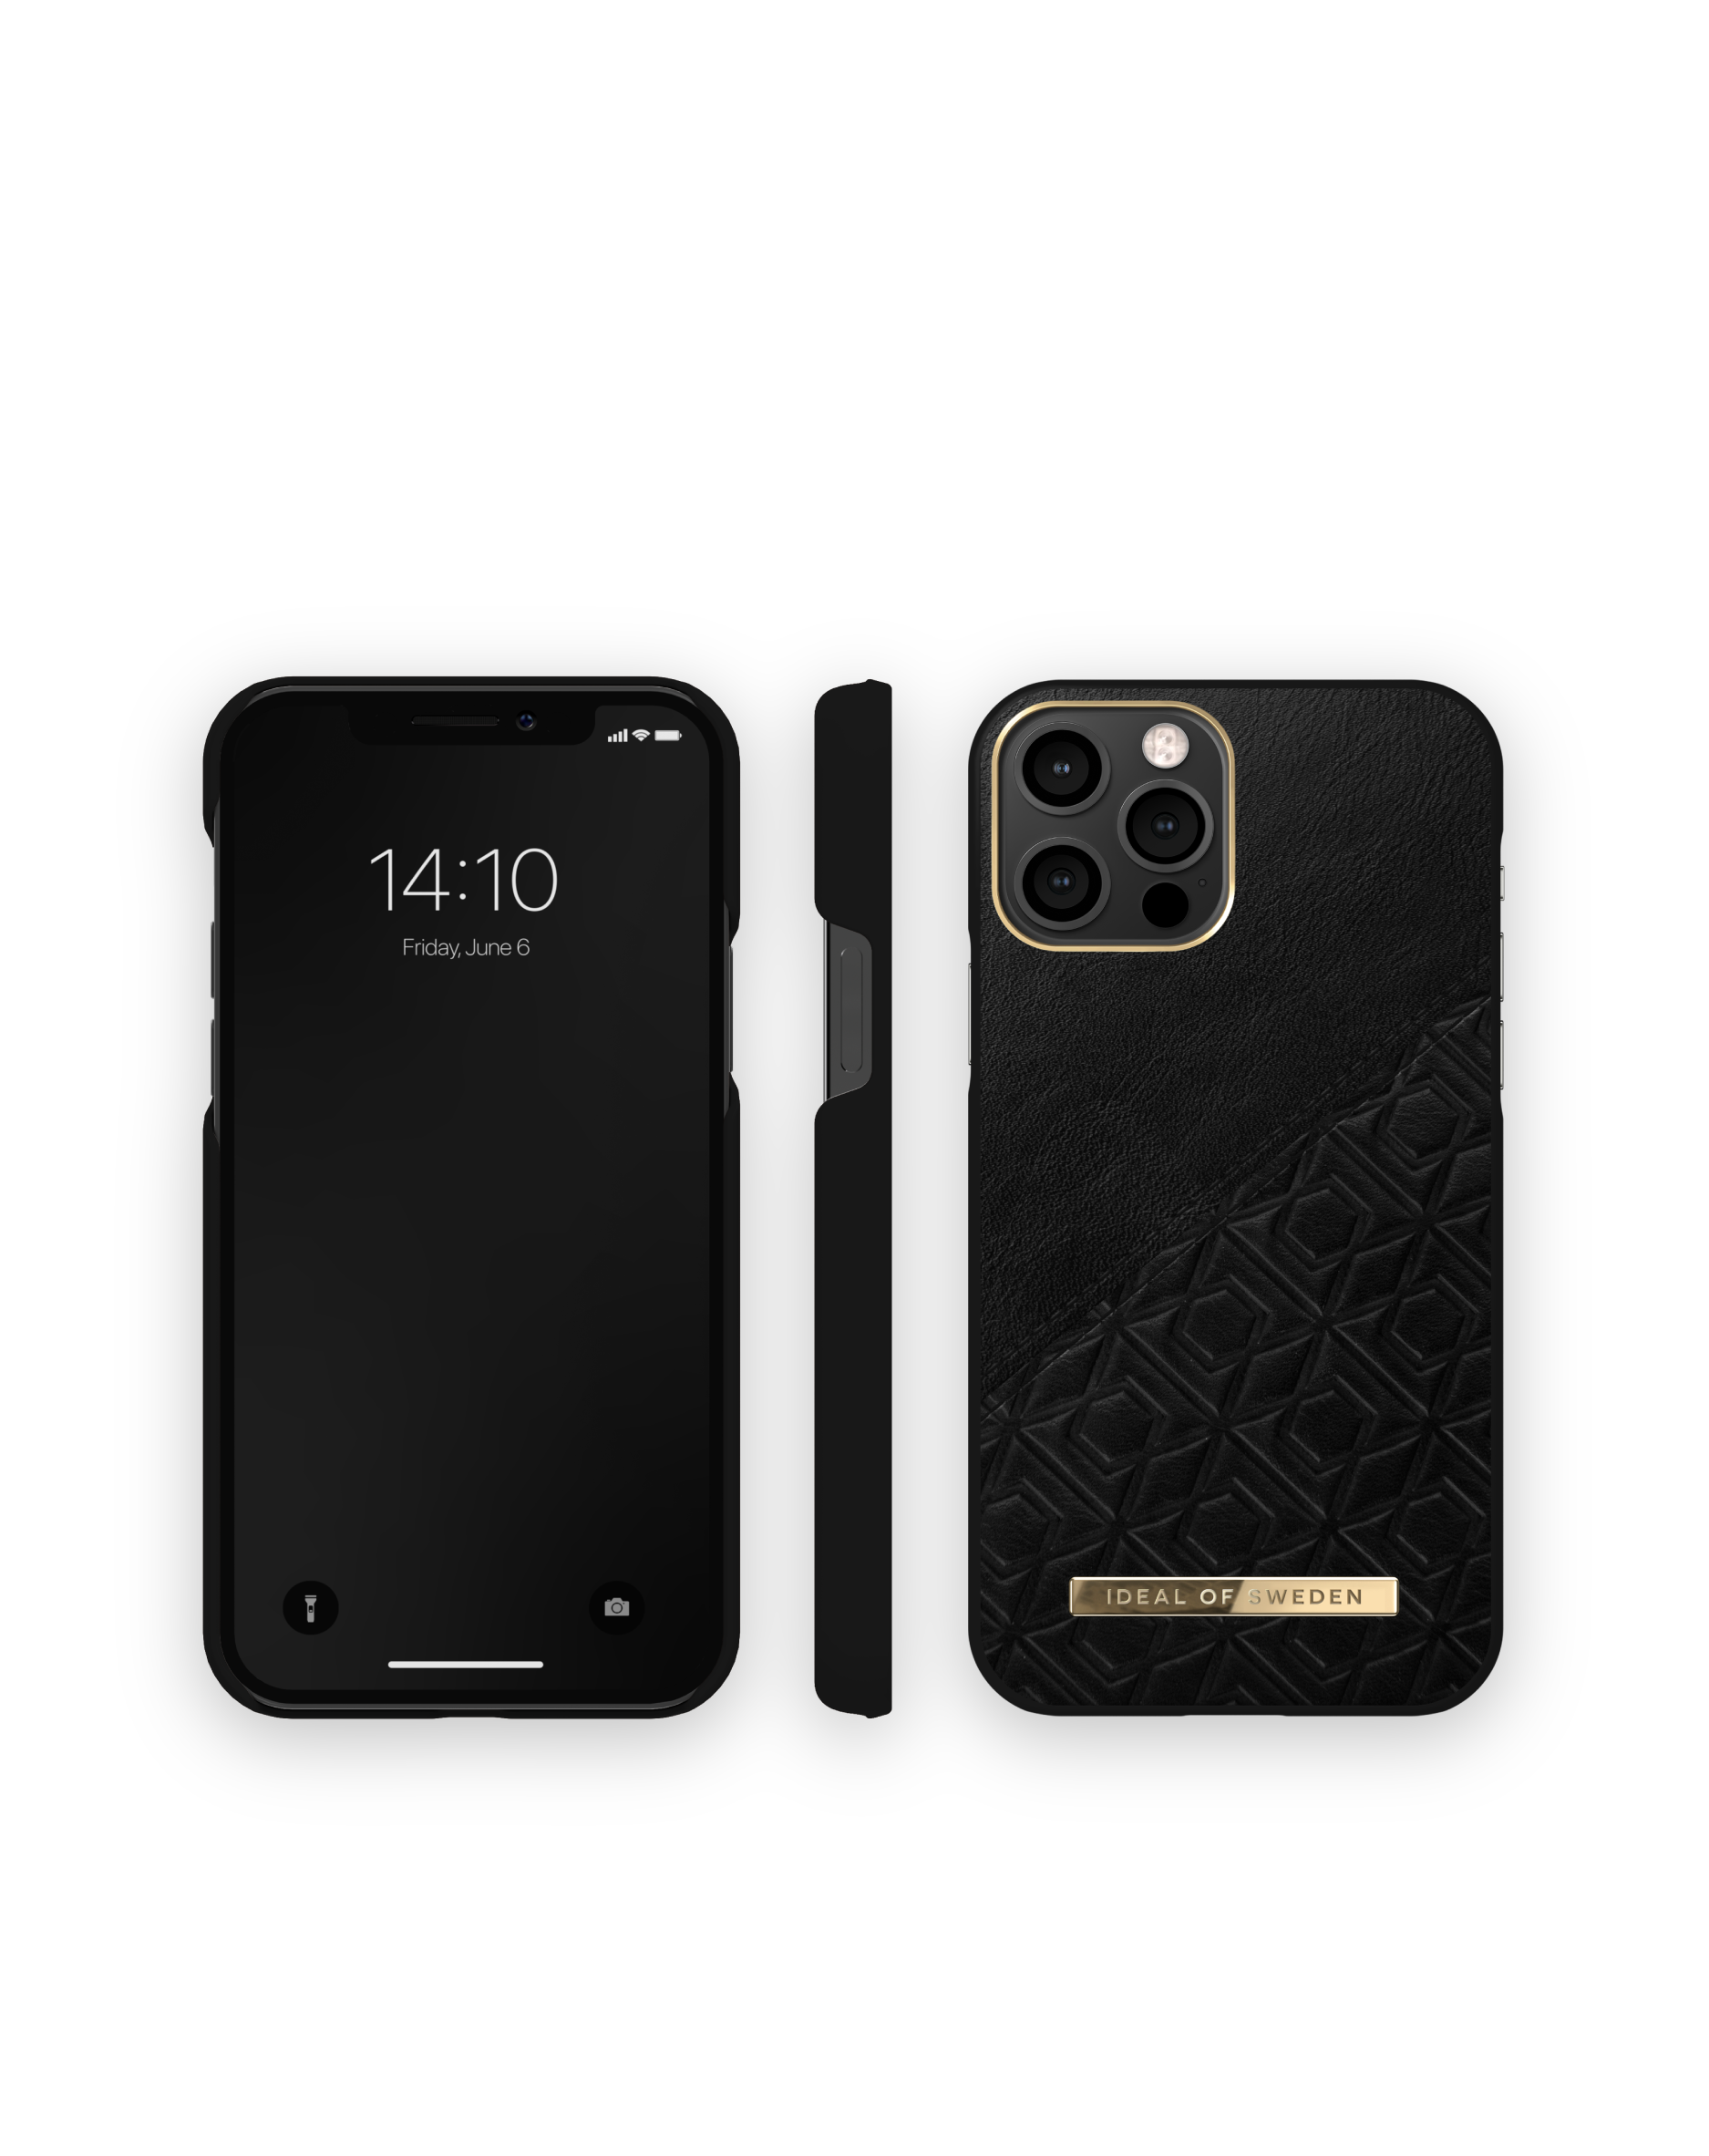 Pro, Backcover, Black IDEAL IDACAW21-I2061-328, OF Embossed Apple, SWEDEN iPhone 12/12